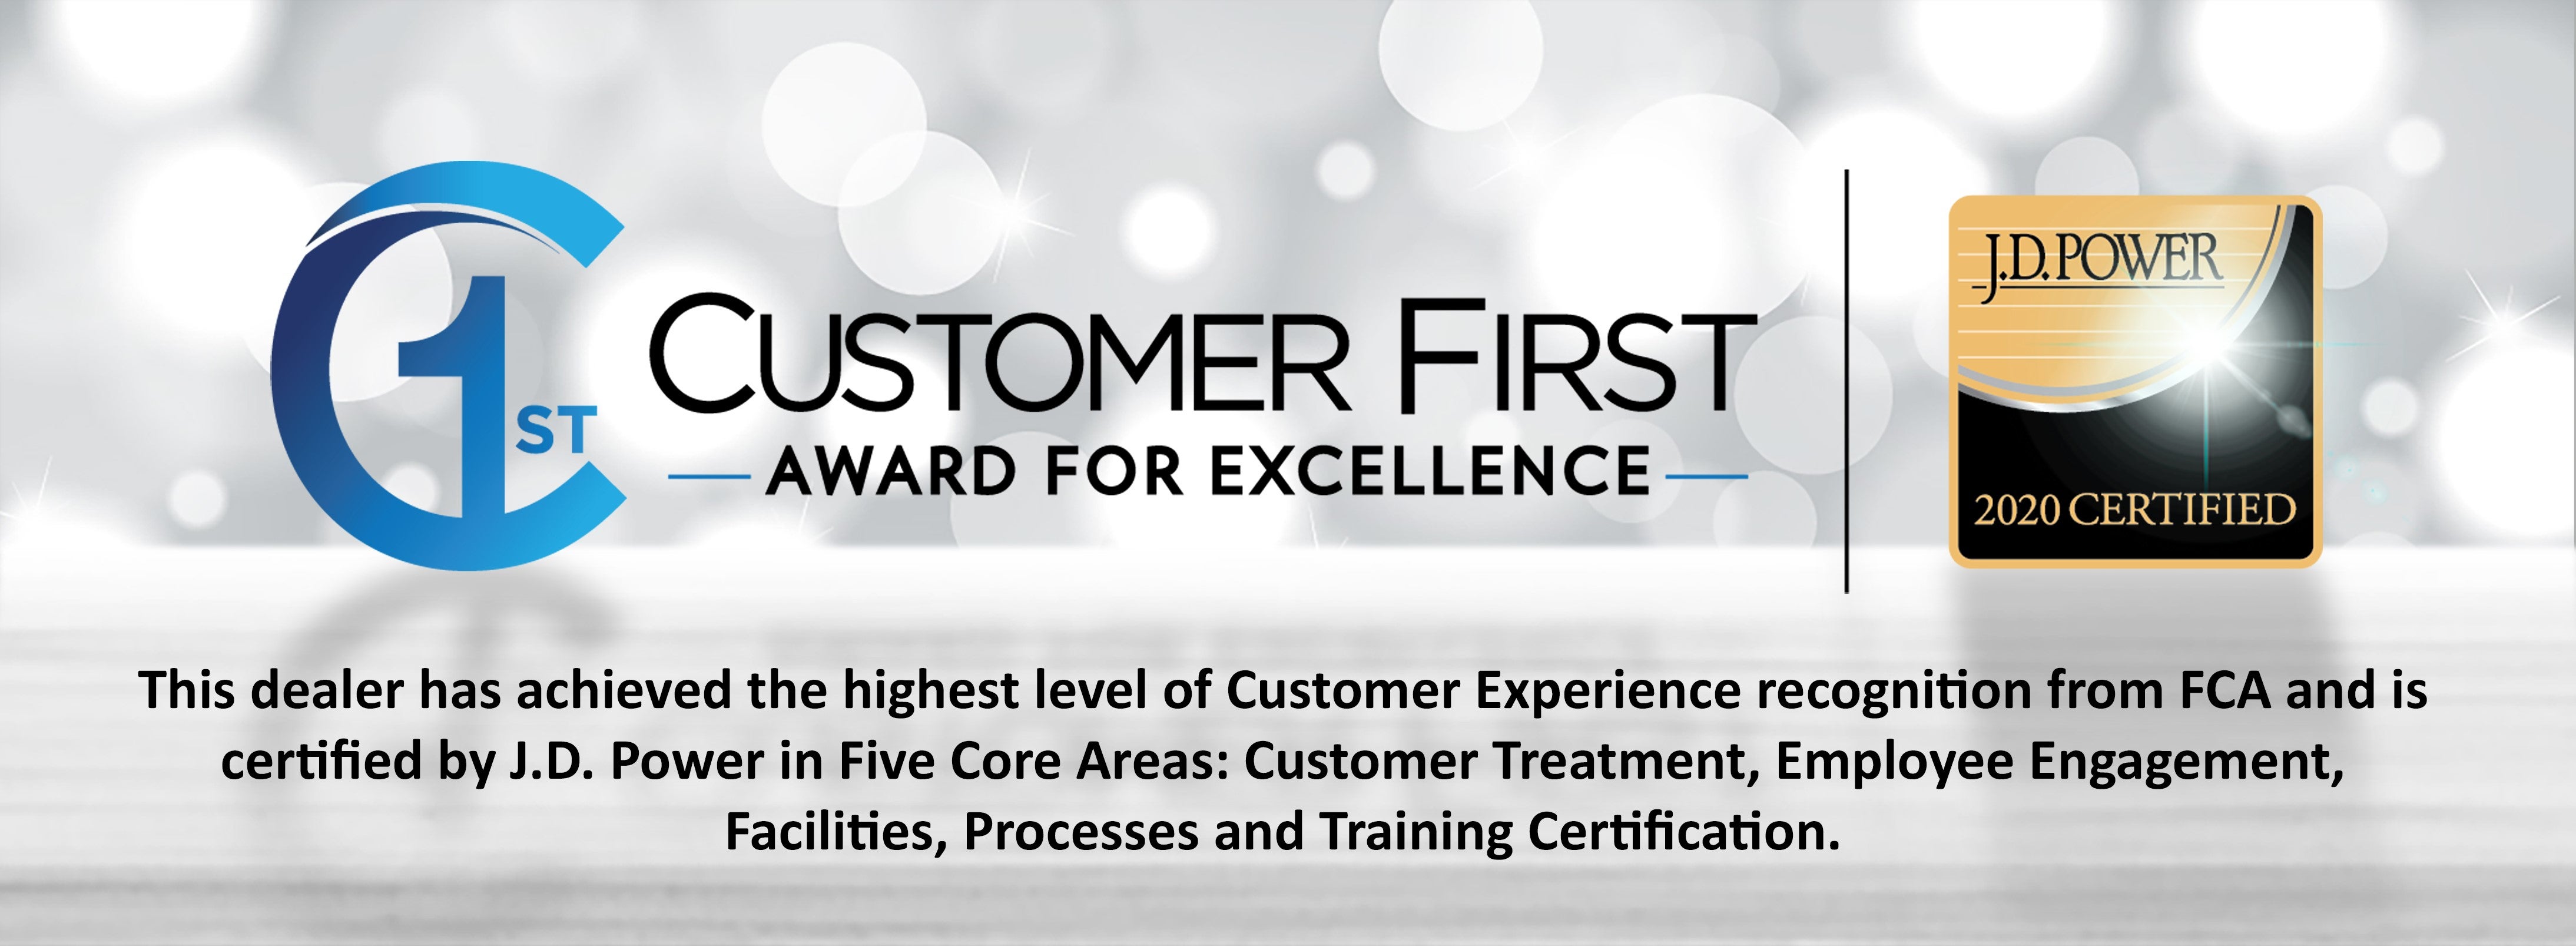 Customer First Award for Excellence for 2019 at Torkelson Motors Inc in Elgin, IA